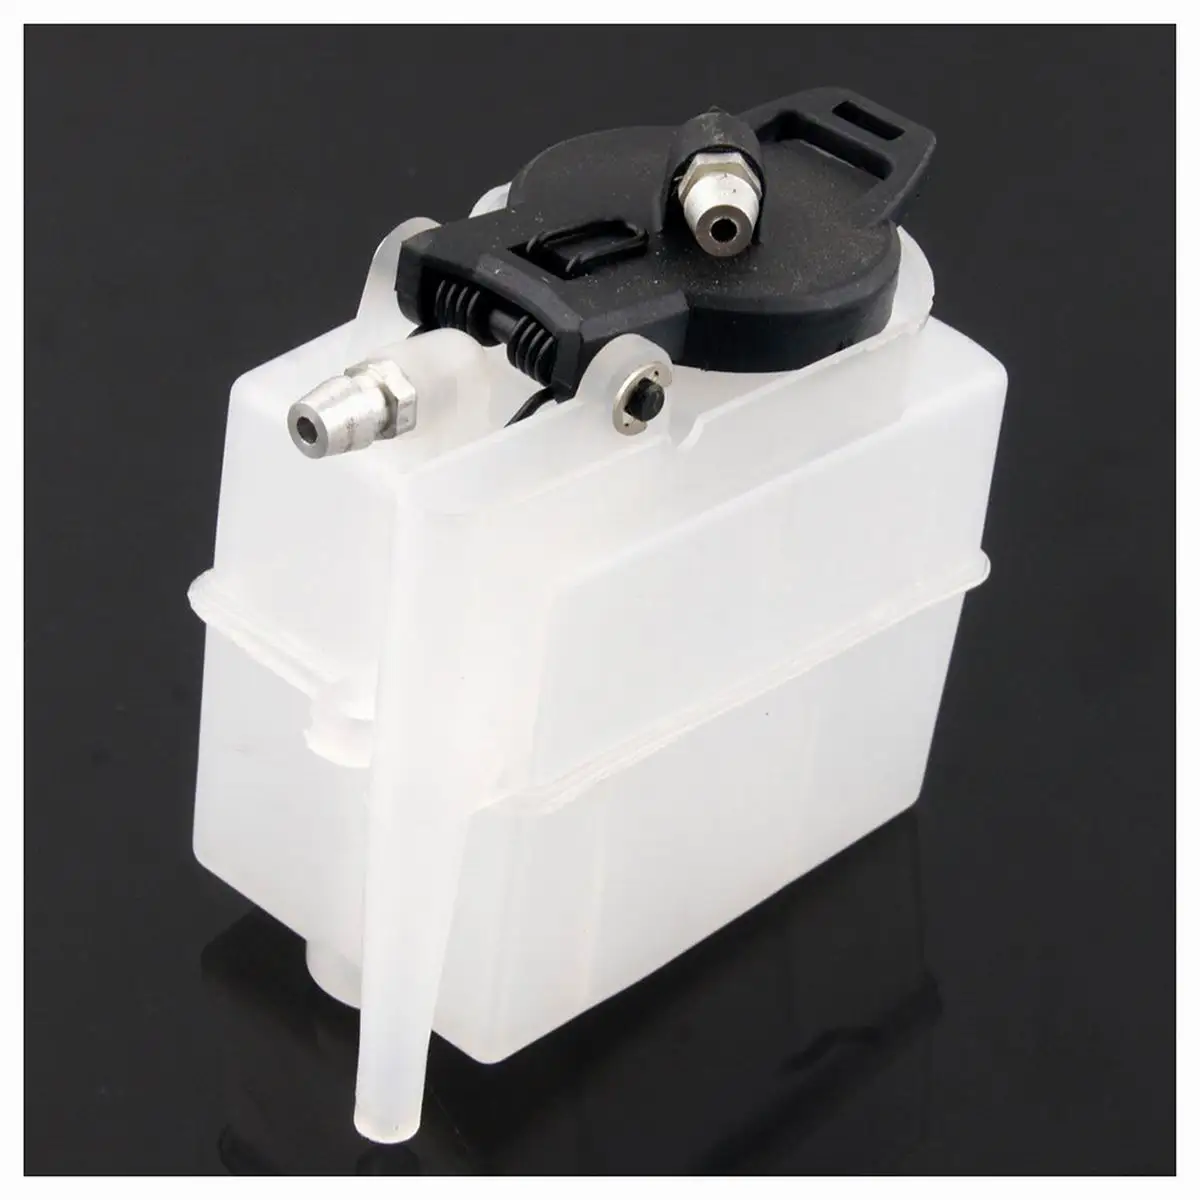 

Universal Hsp 02004 Fuel Tank Fuel Tank Replacement for 1:10 H SP 94122/94177/94166/94188/94108 RC Model Car Buggy